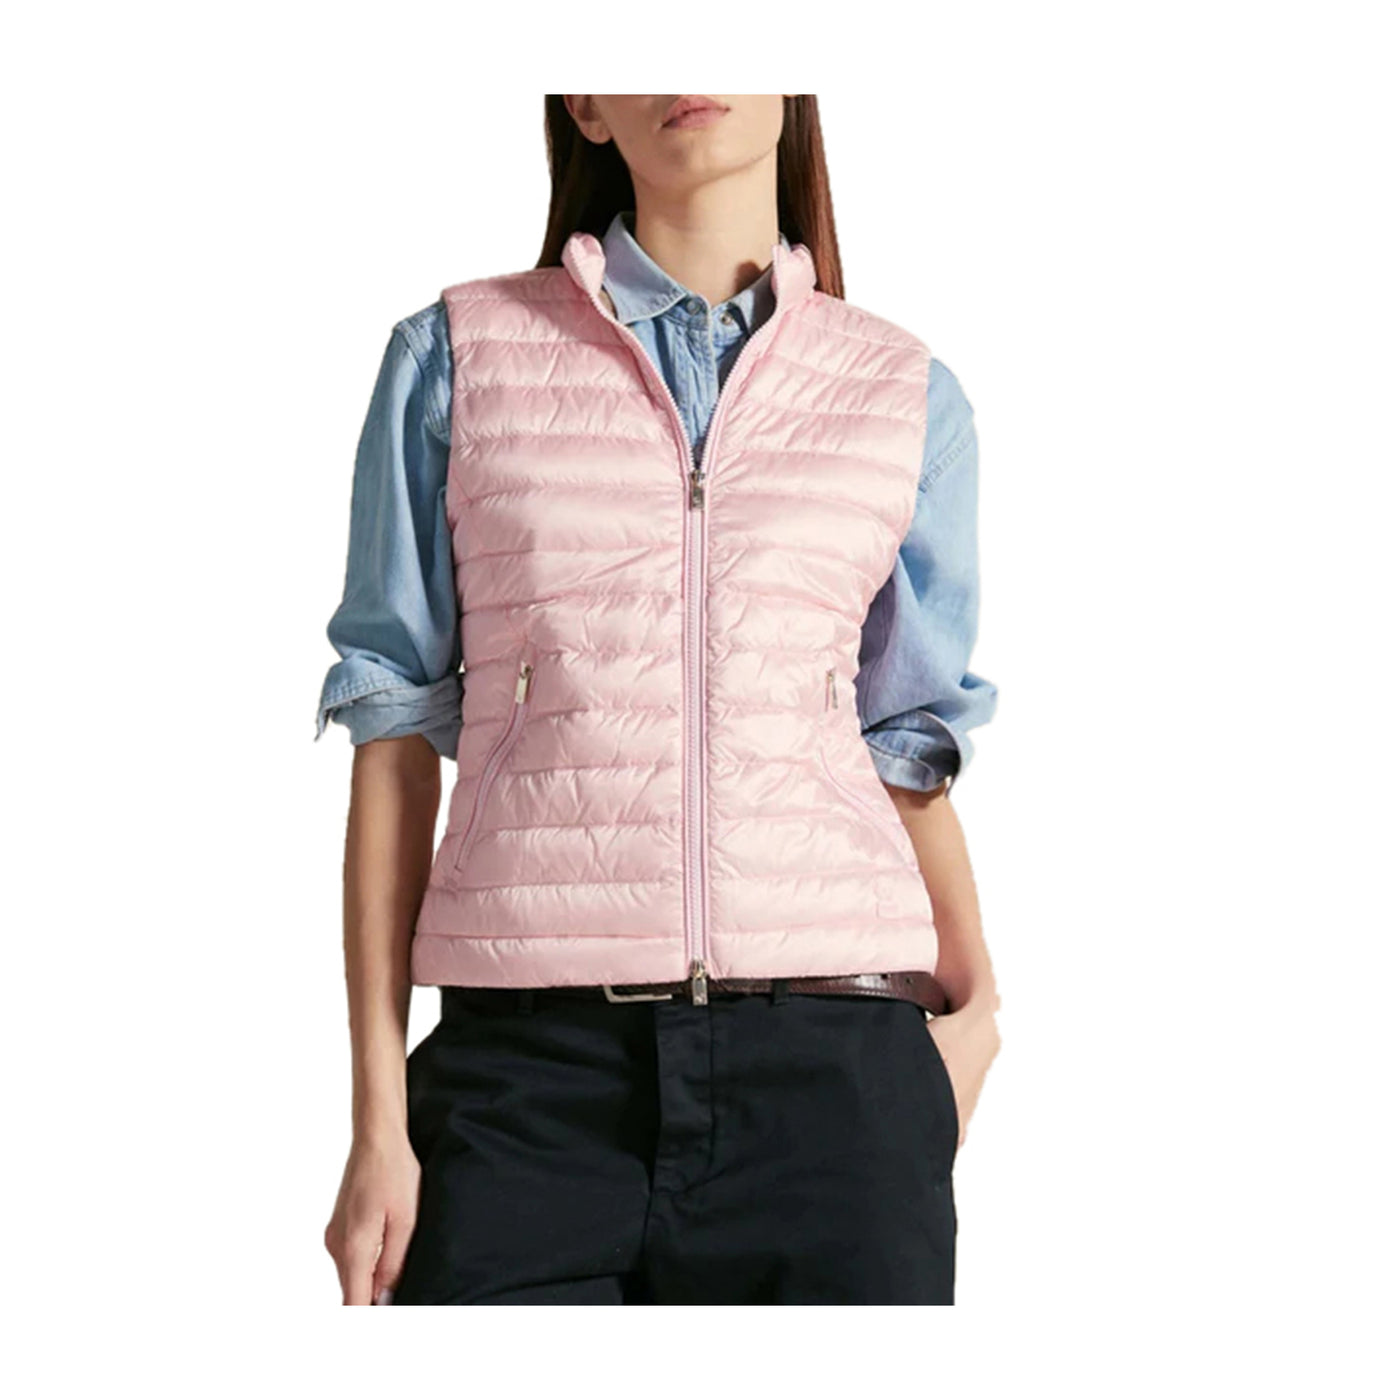 Women's vest with matching logo